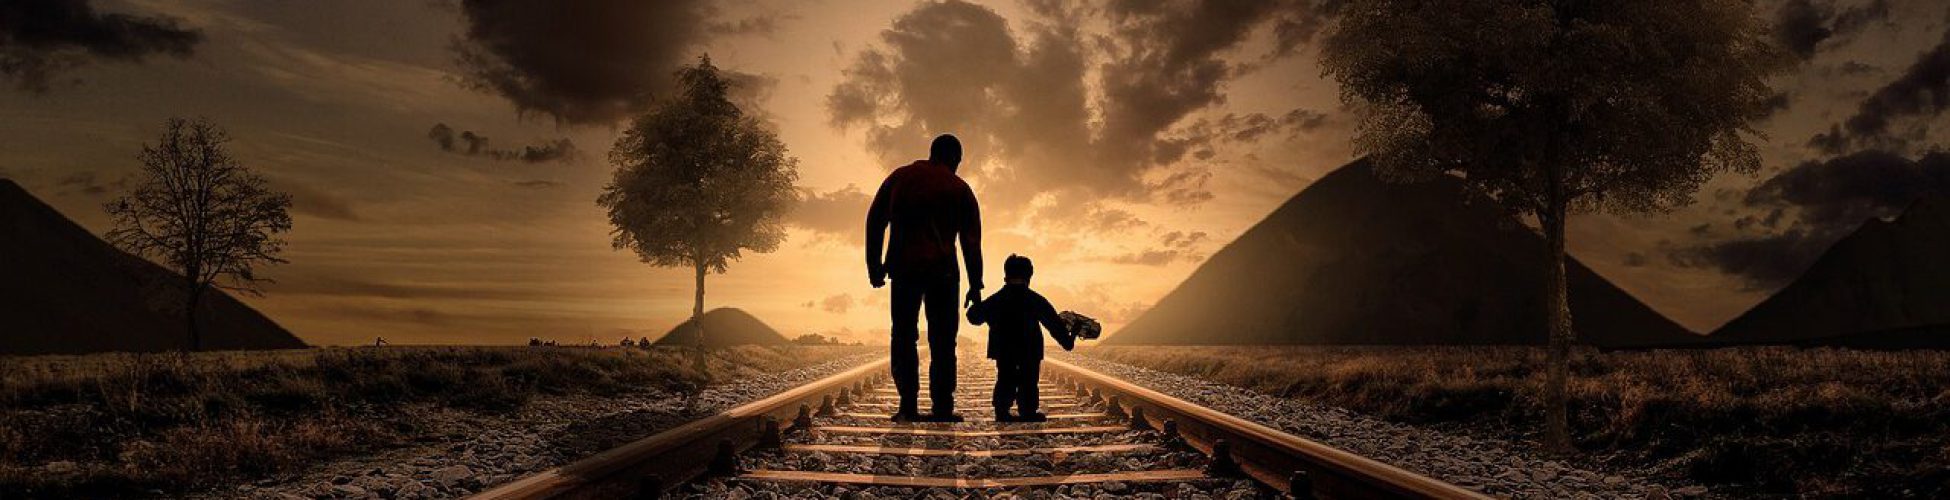 father-and-son-2258681_1280